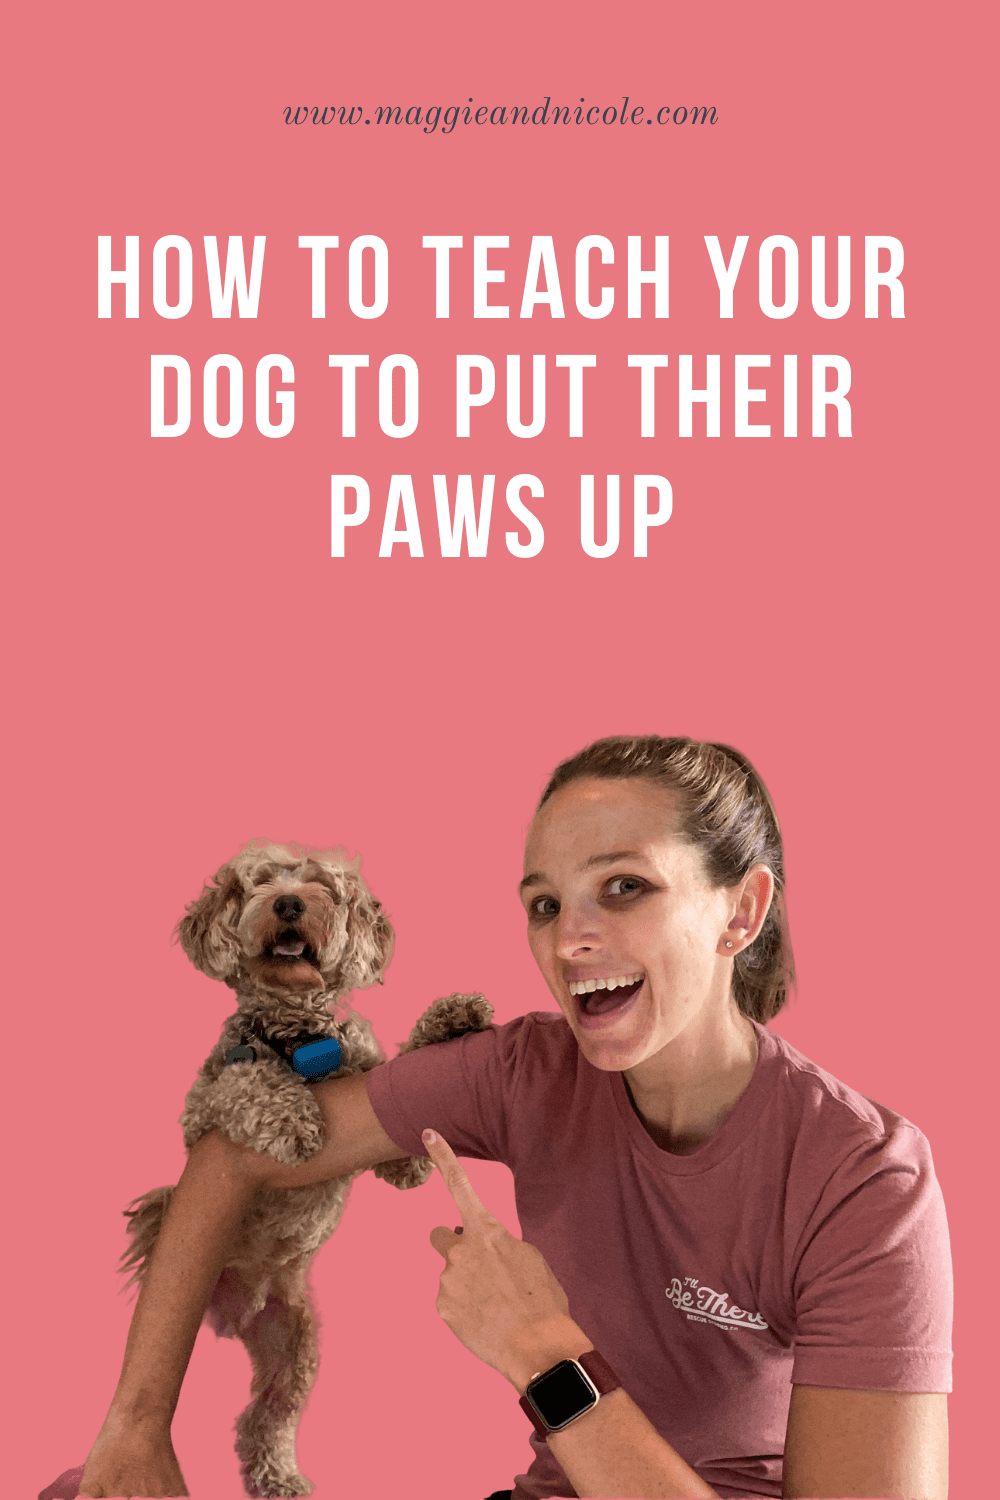 How to teach your dog to put their paws up